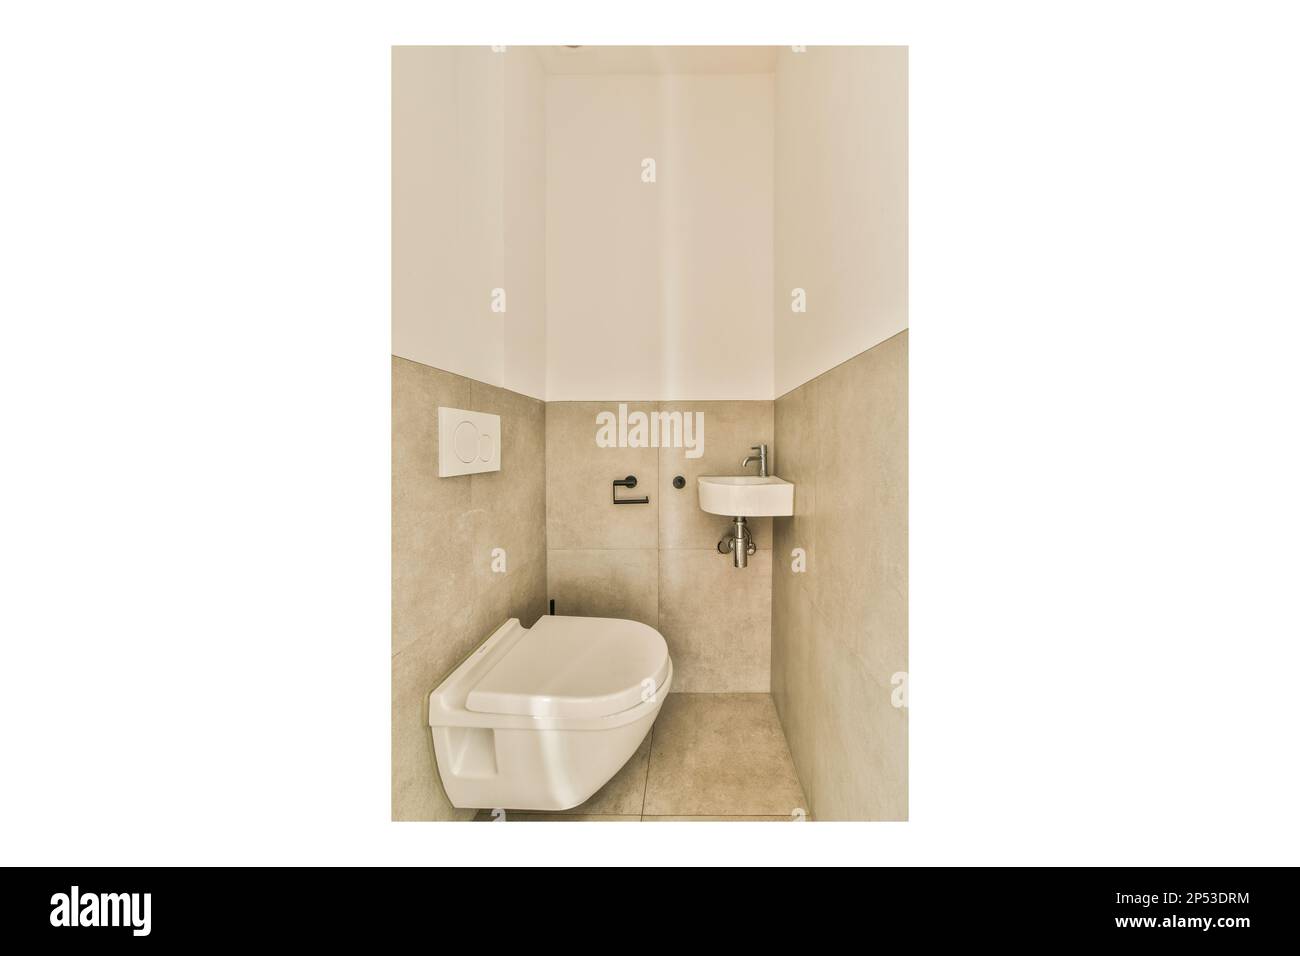 a white toilet in the corner of a bathroom with beige tiles on the walls and floor, there is an image of a wall Stock Photo